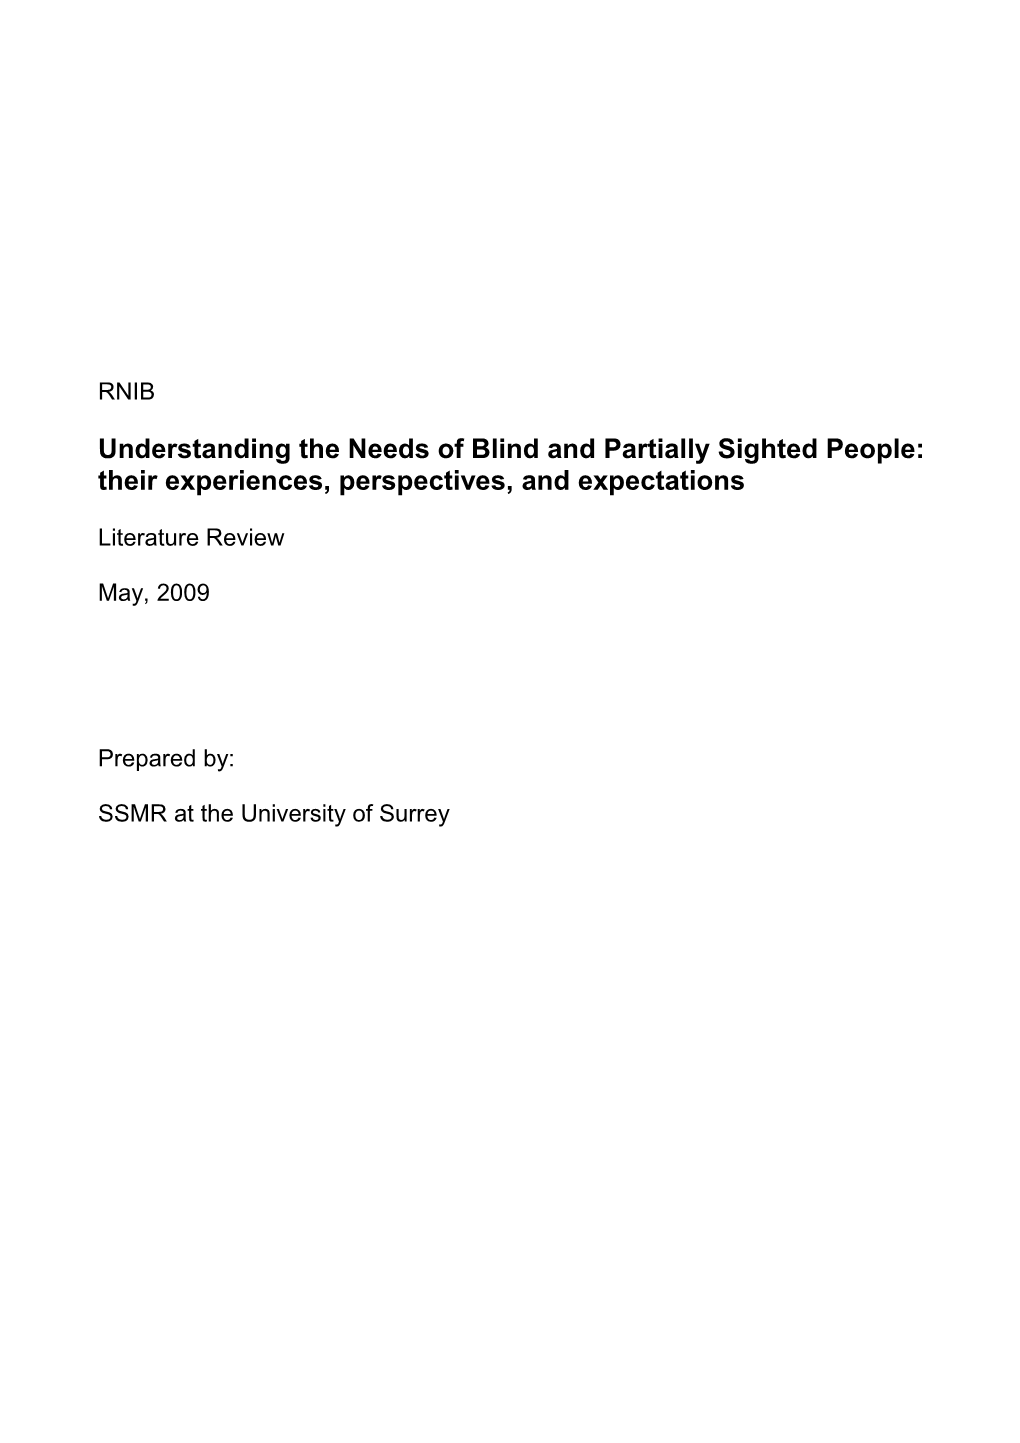 Understanding the Needs of Blind and Partially Sighted People Literature Review